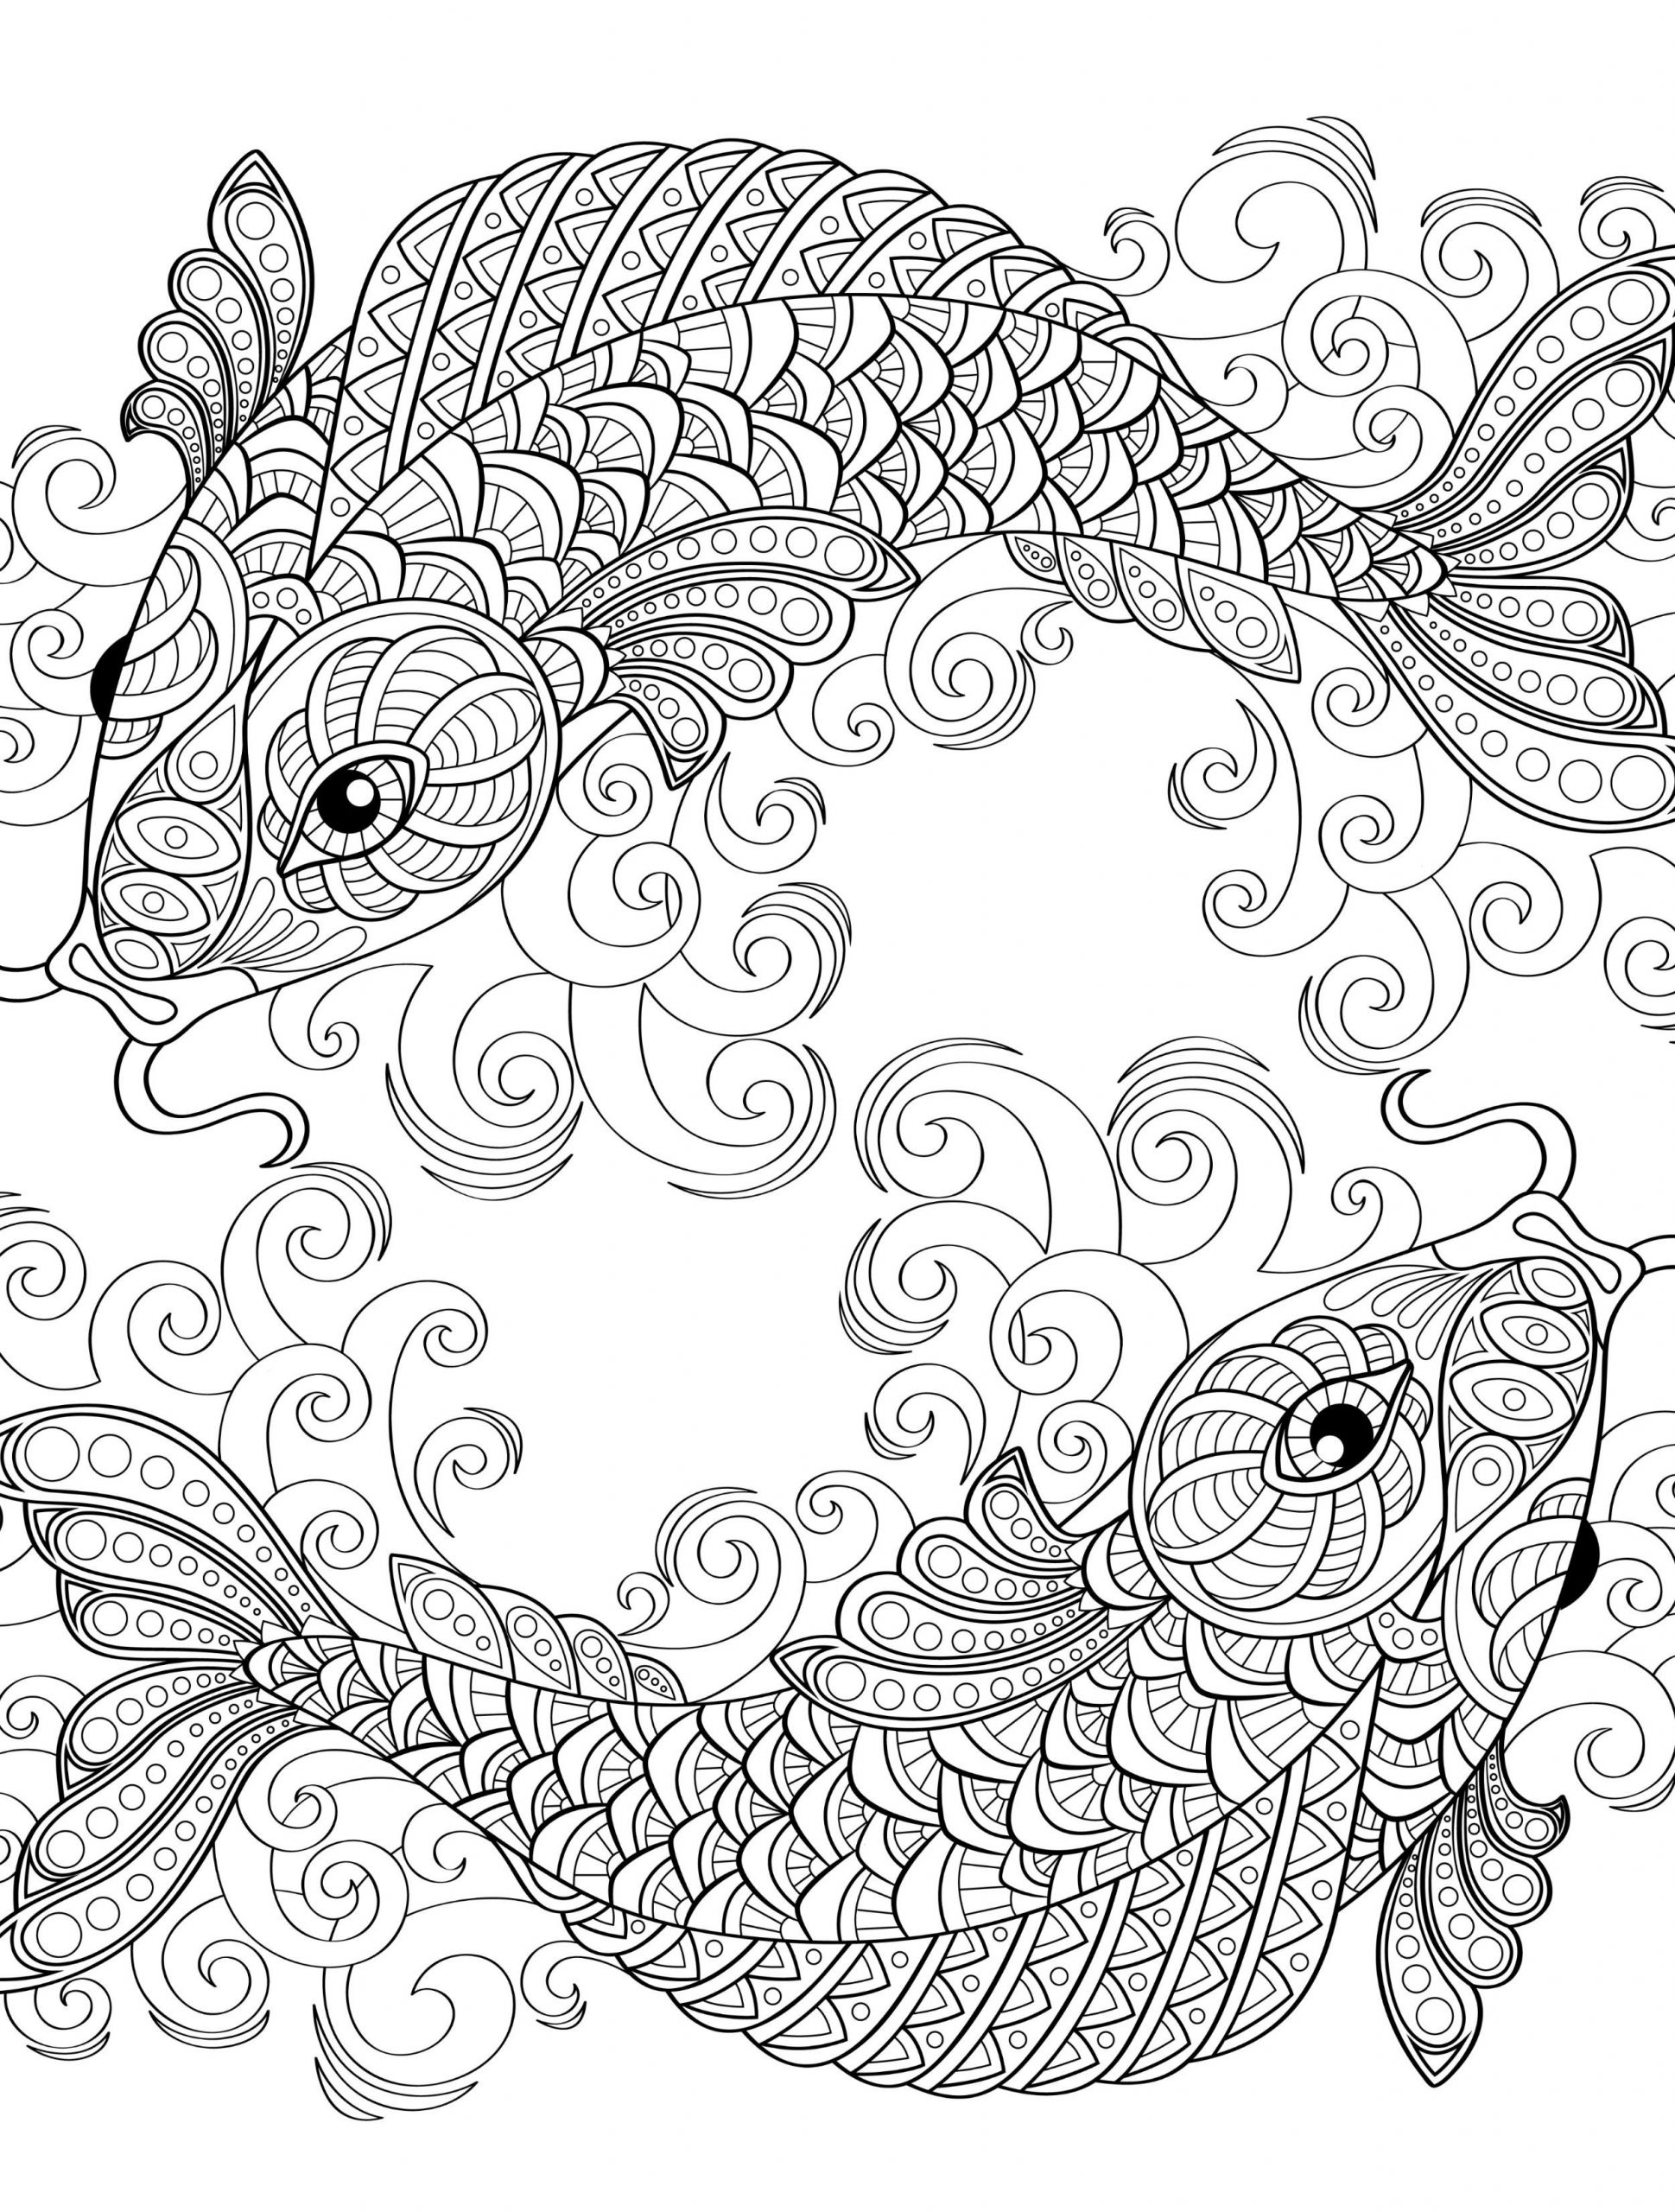 Best Coloring Books For Adults
 Pin on coloring